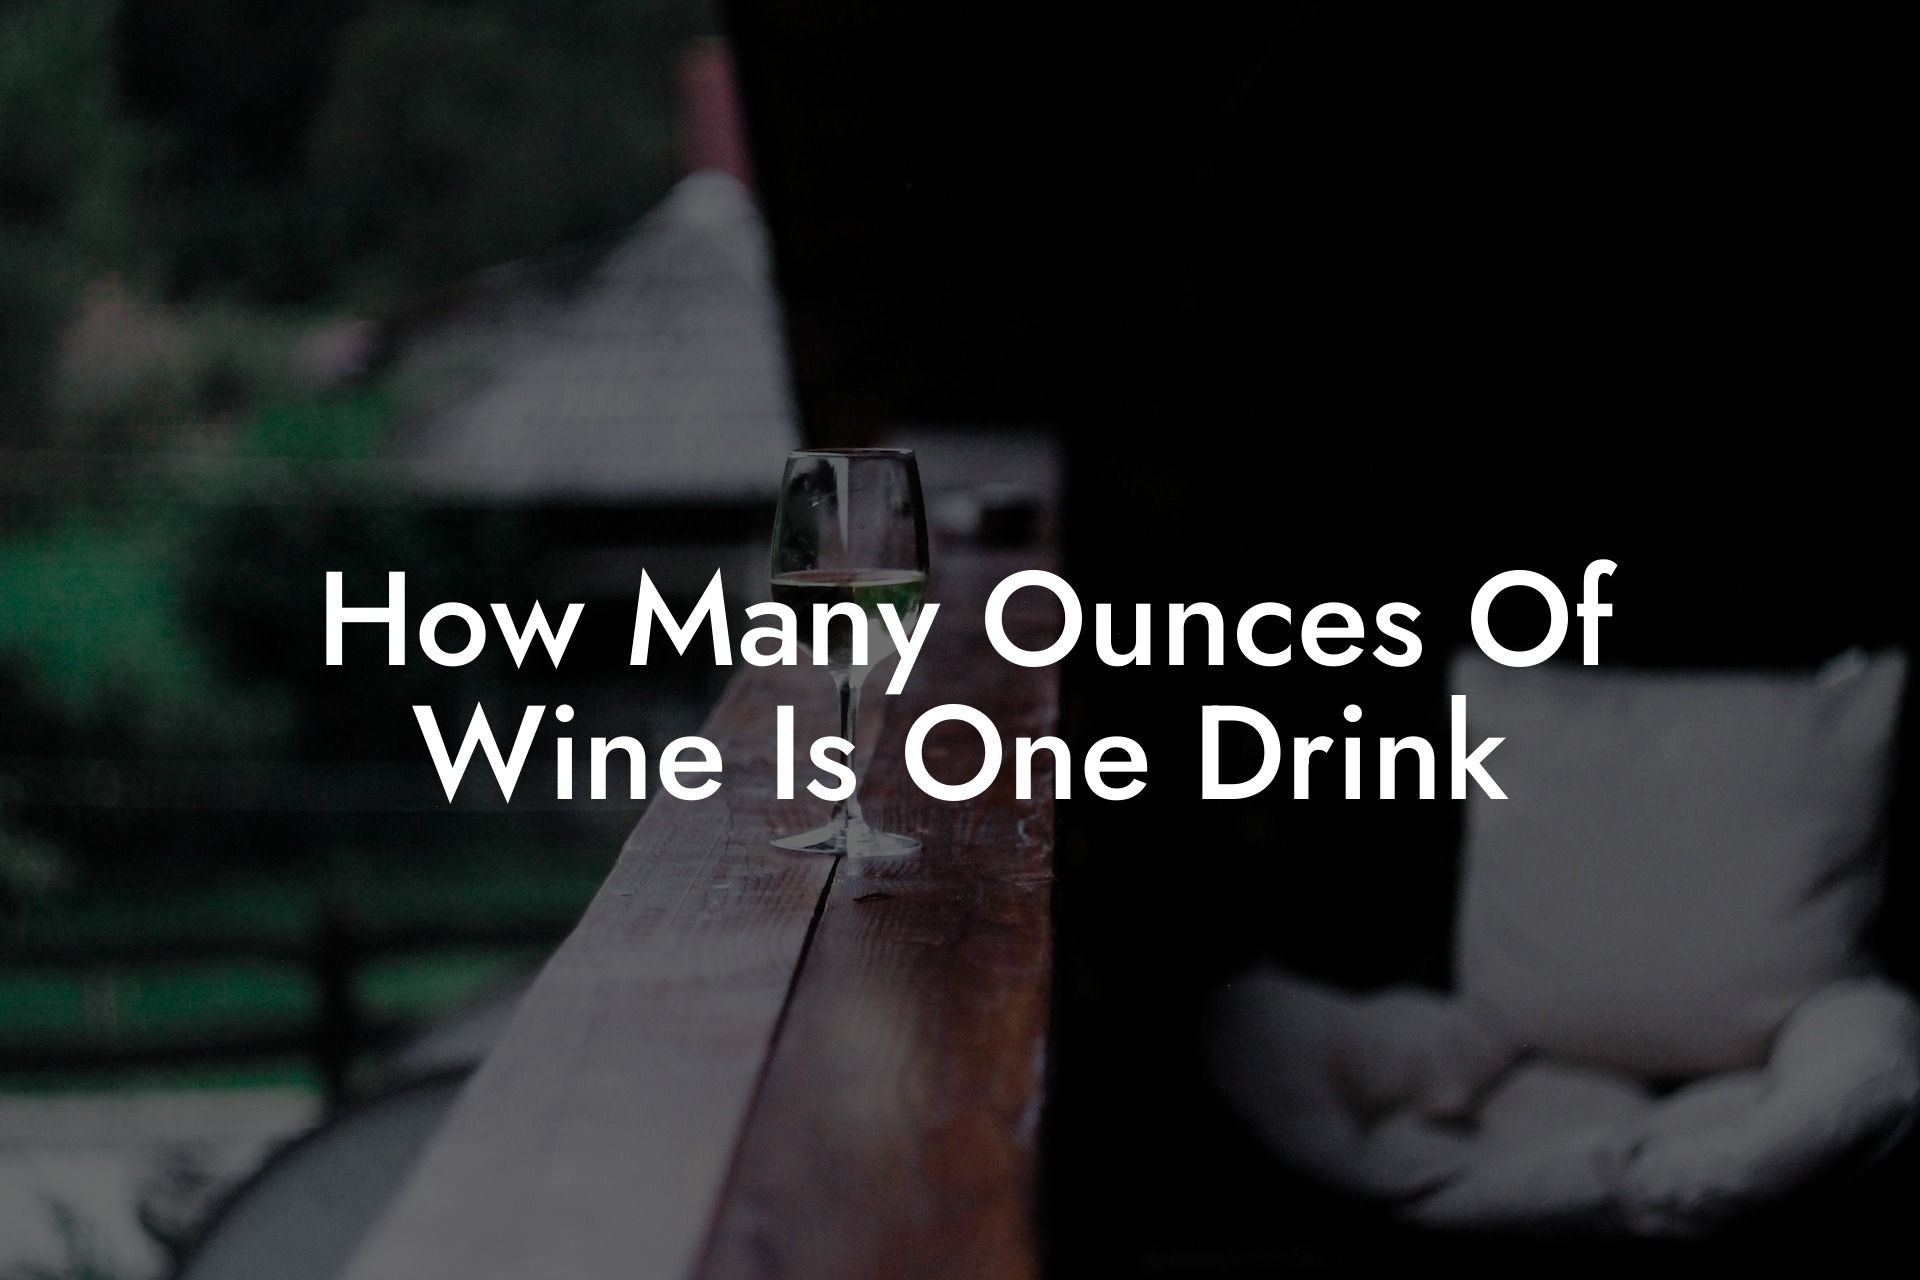 How Many Ounces Of Wine Is One Drink